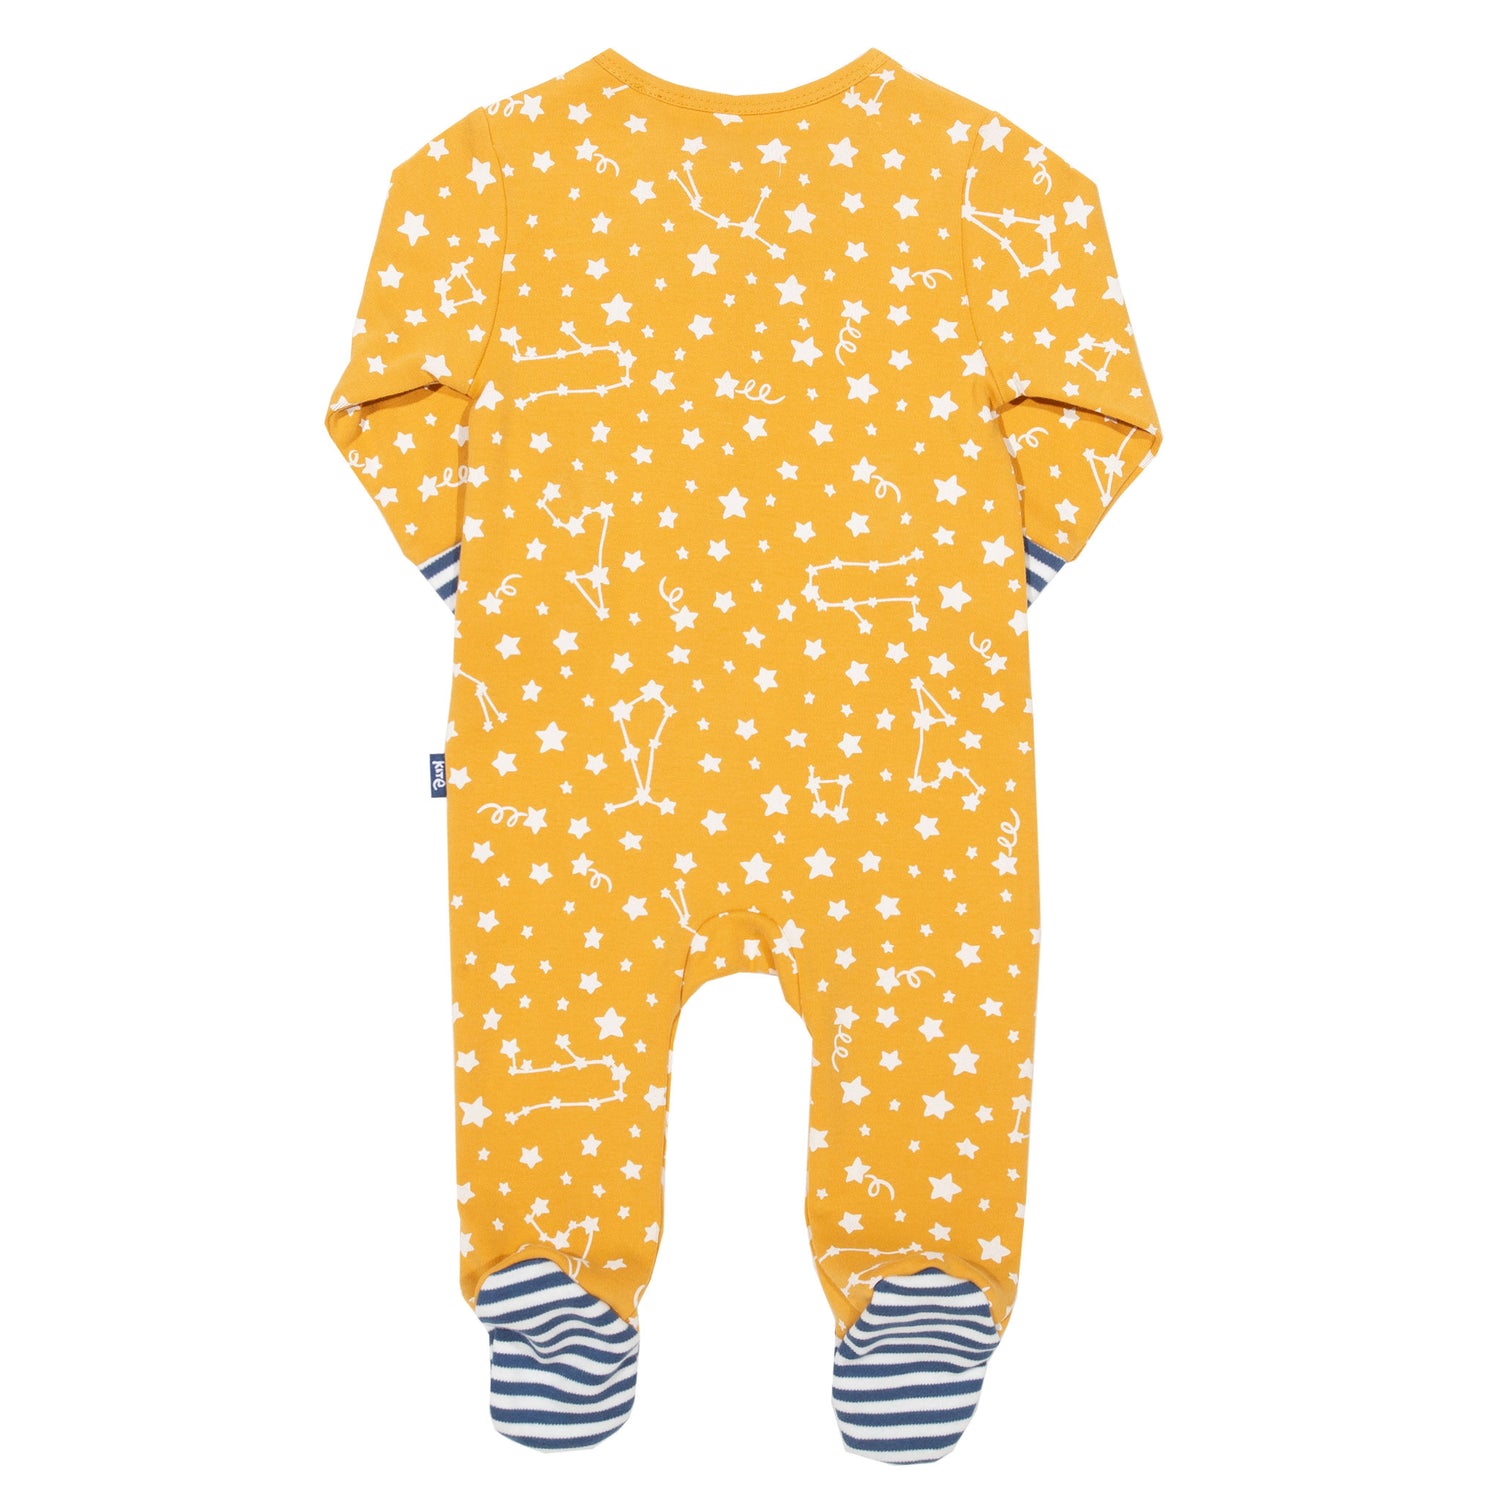 Back of yellow sleepsuit with star print